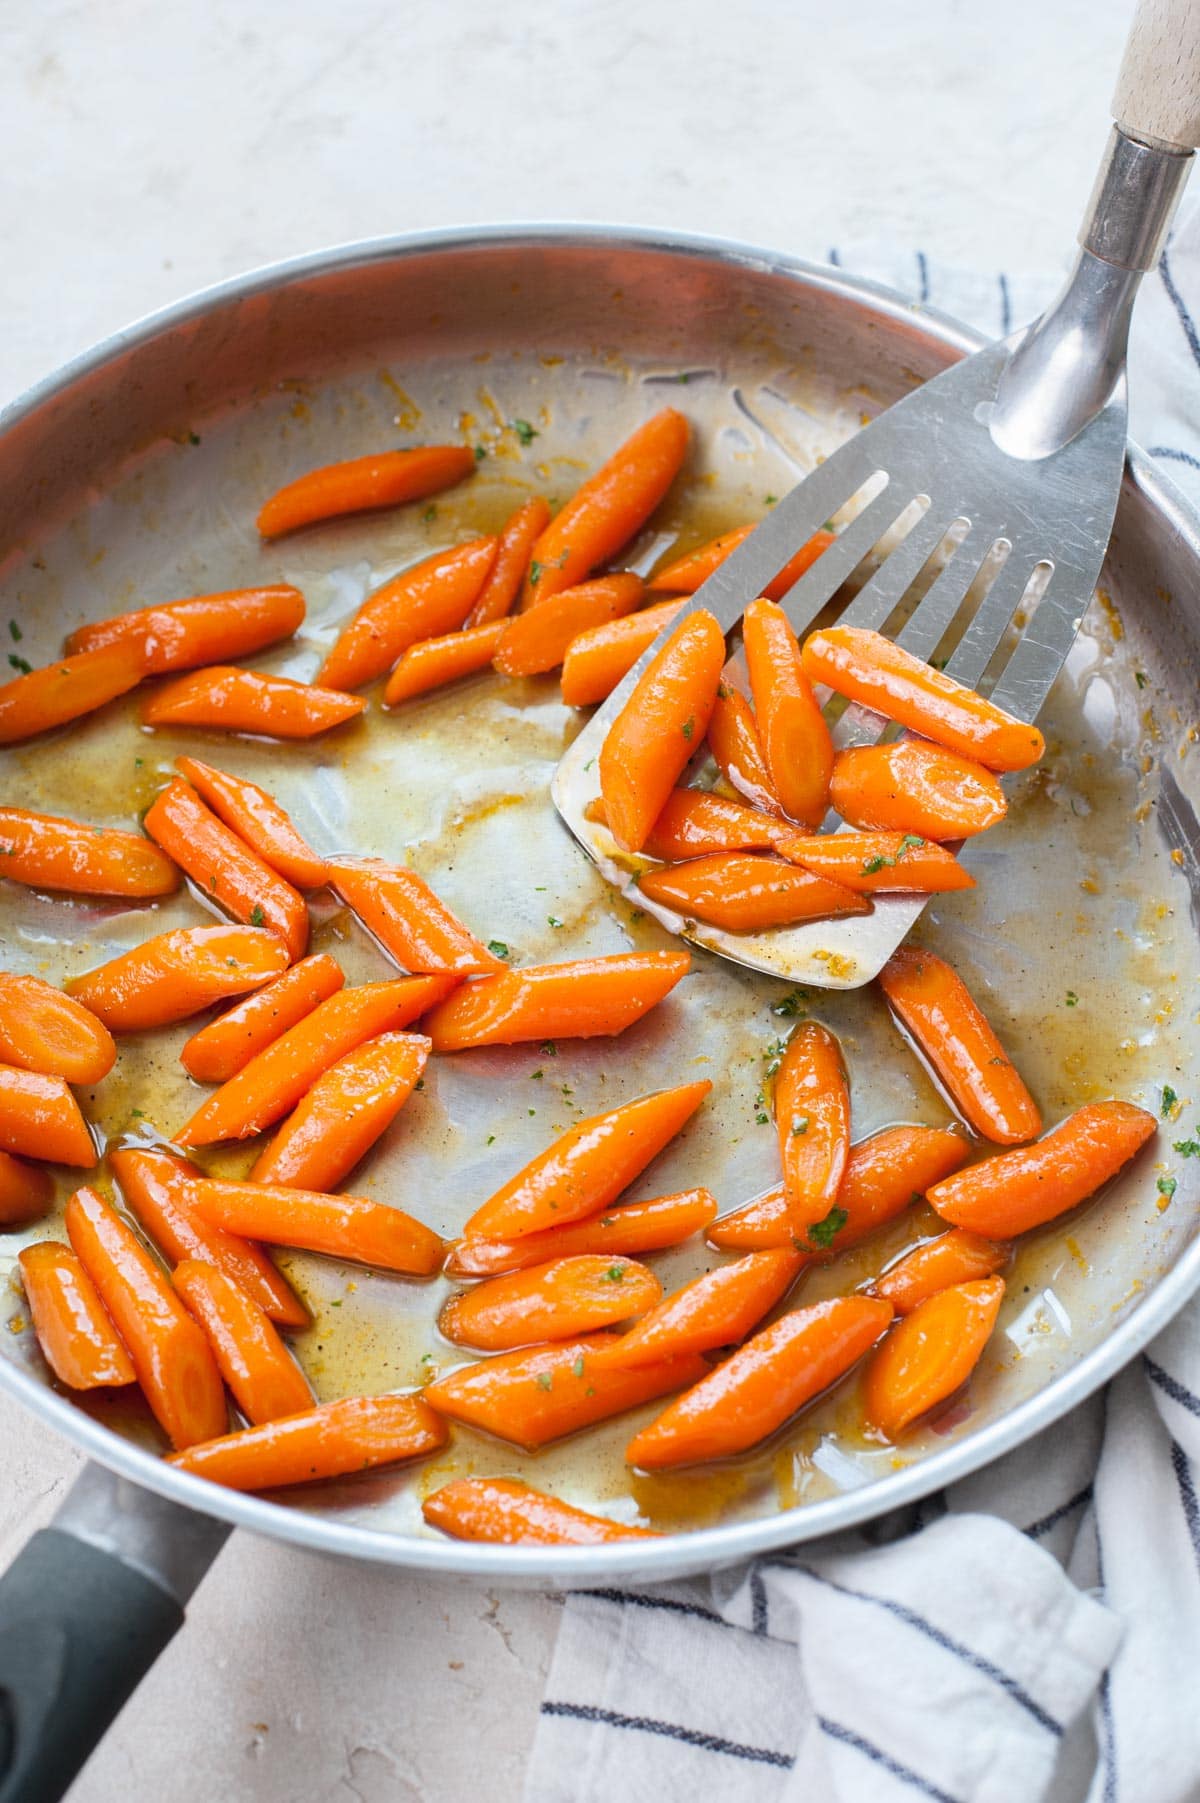 Honey glazed carrots are being scooped with a spatula from a frying pan.